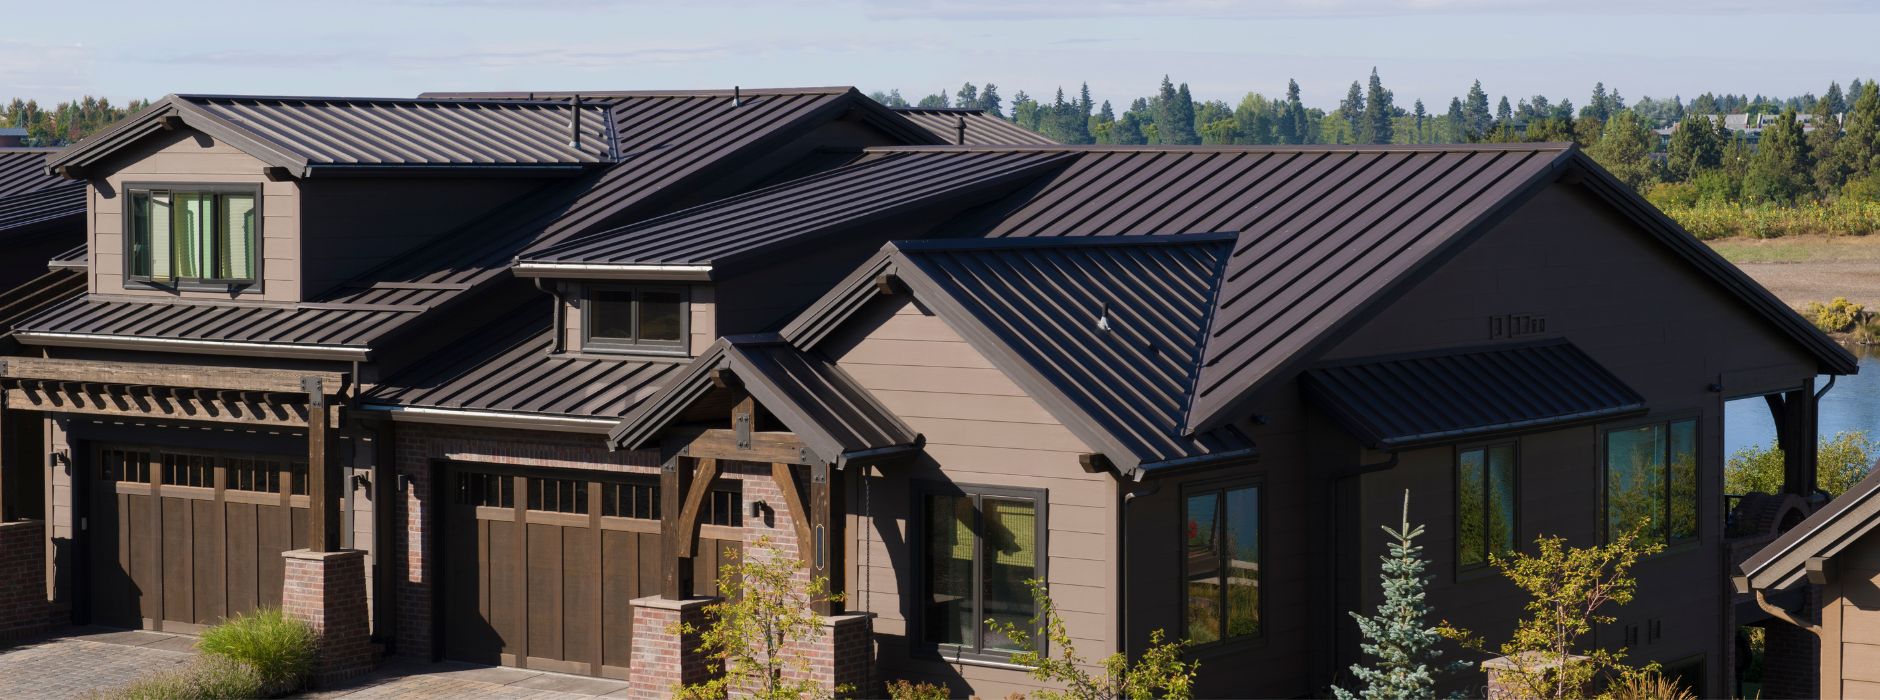 How to Pay for a New Roof Financing, Insurance, Out of Pocket and More